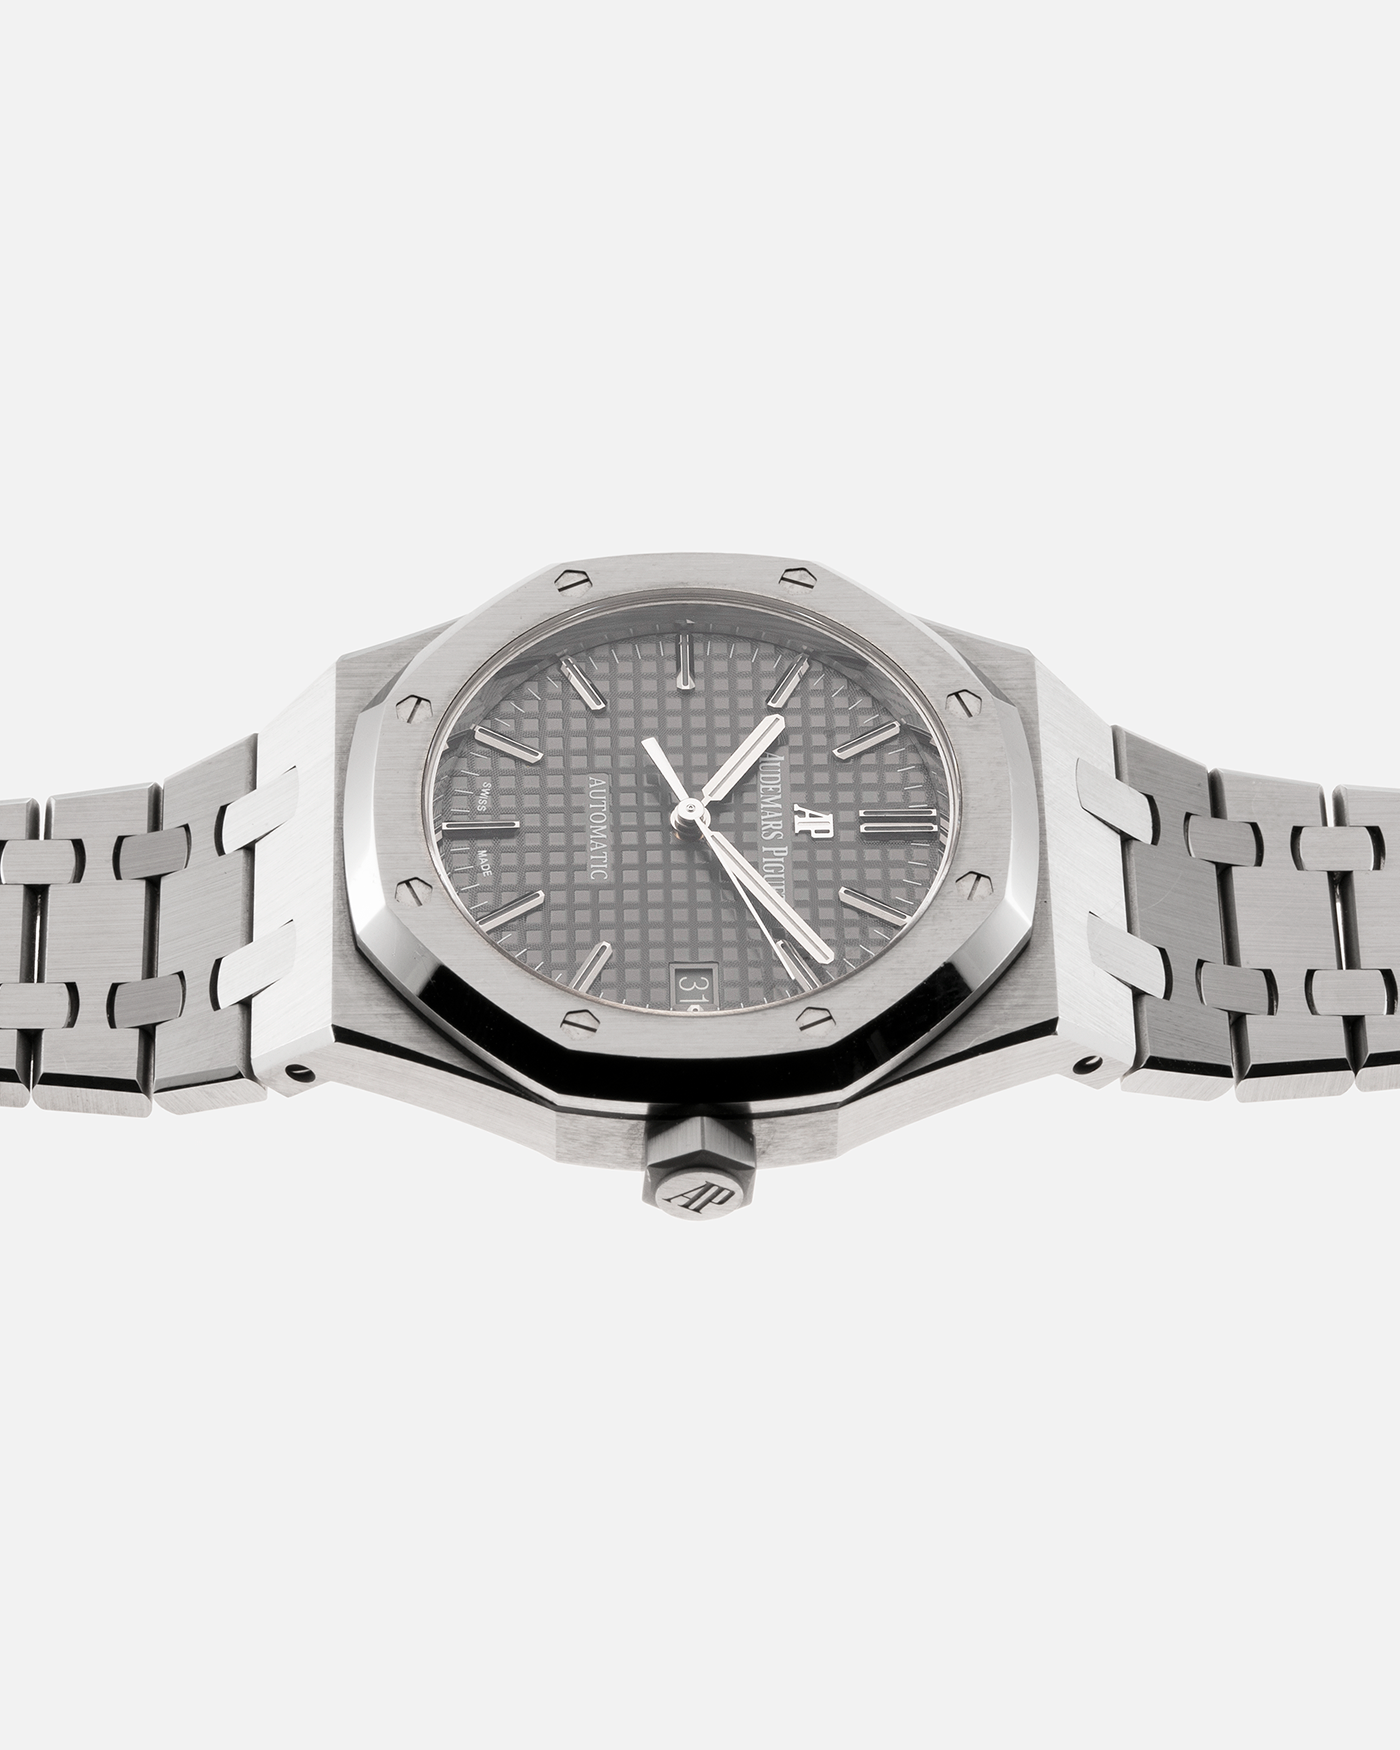 Brand: Audemars Piguet Year: 2020 Model: Royal Oak Reference Number: 15450ST Material: Stainless Steel Movement: Cal. 3120, Self-Winding Case Diameter: 37mm Bracelet: Audemars Piguet Stainless Steel Integrated Bracelet with Signed Clasp